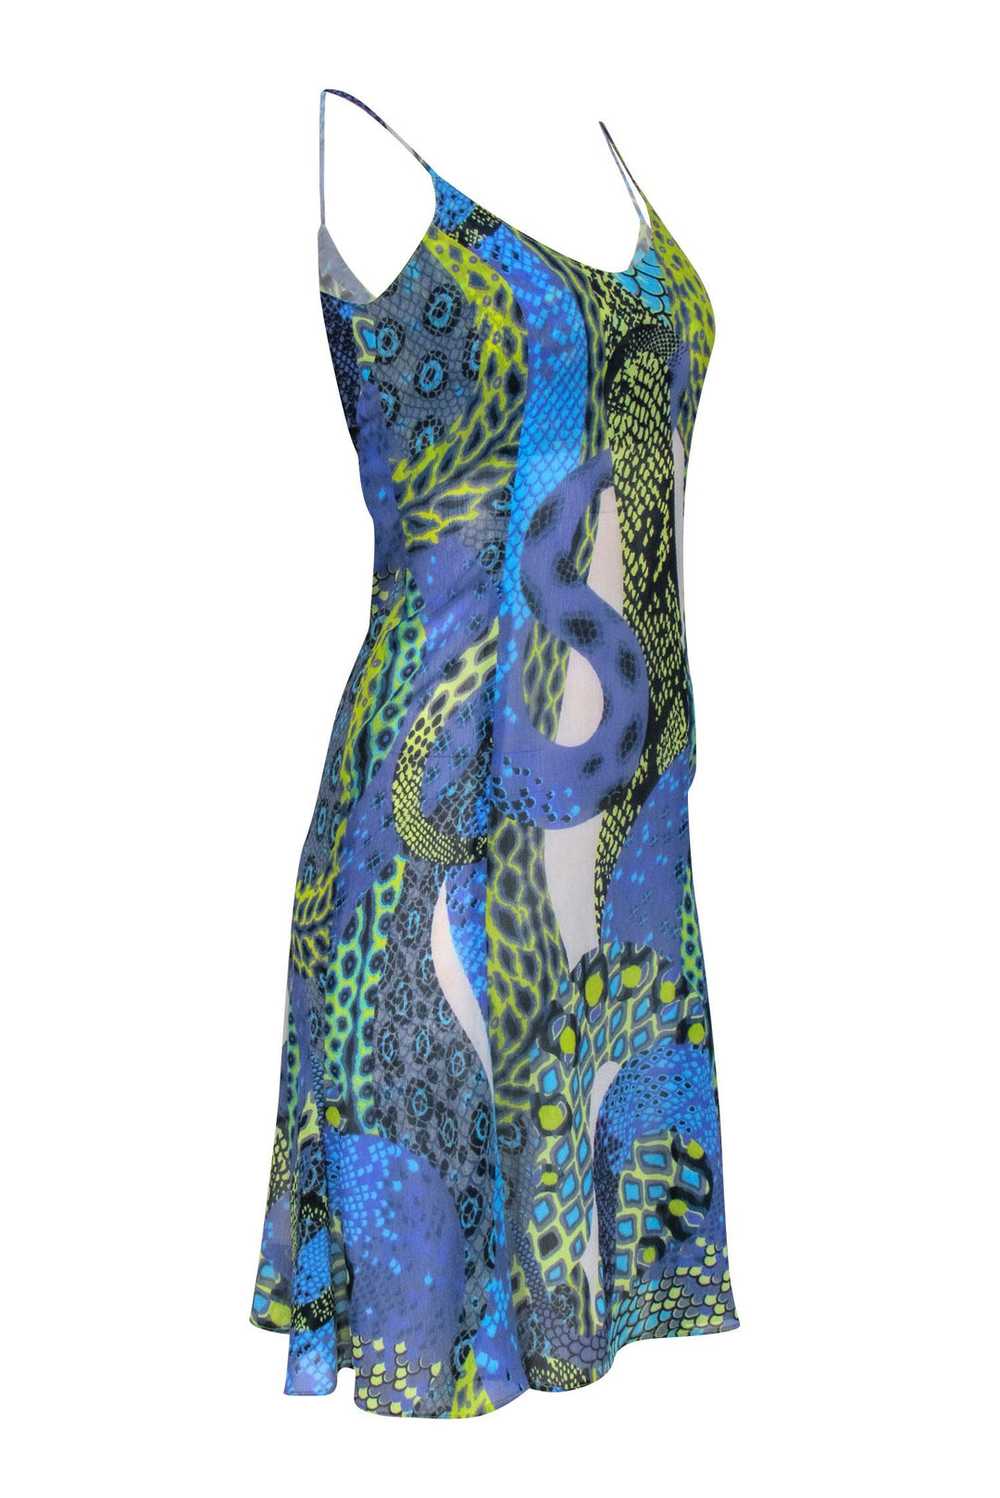 Versace Jeans Couture - Blue & Green Python Print… - image 2